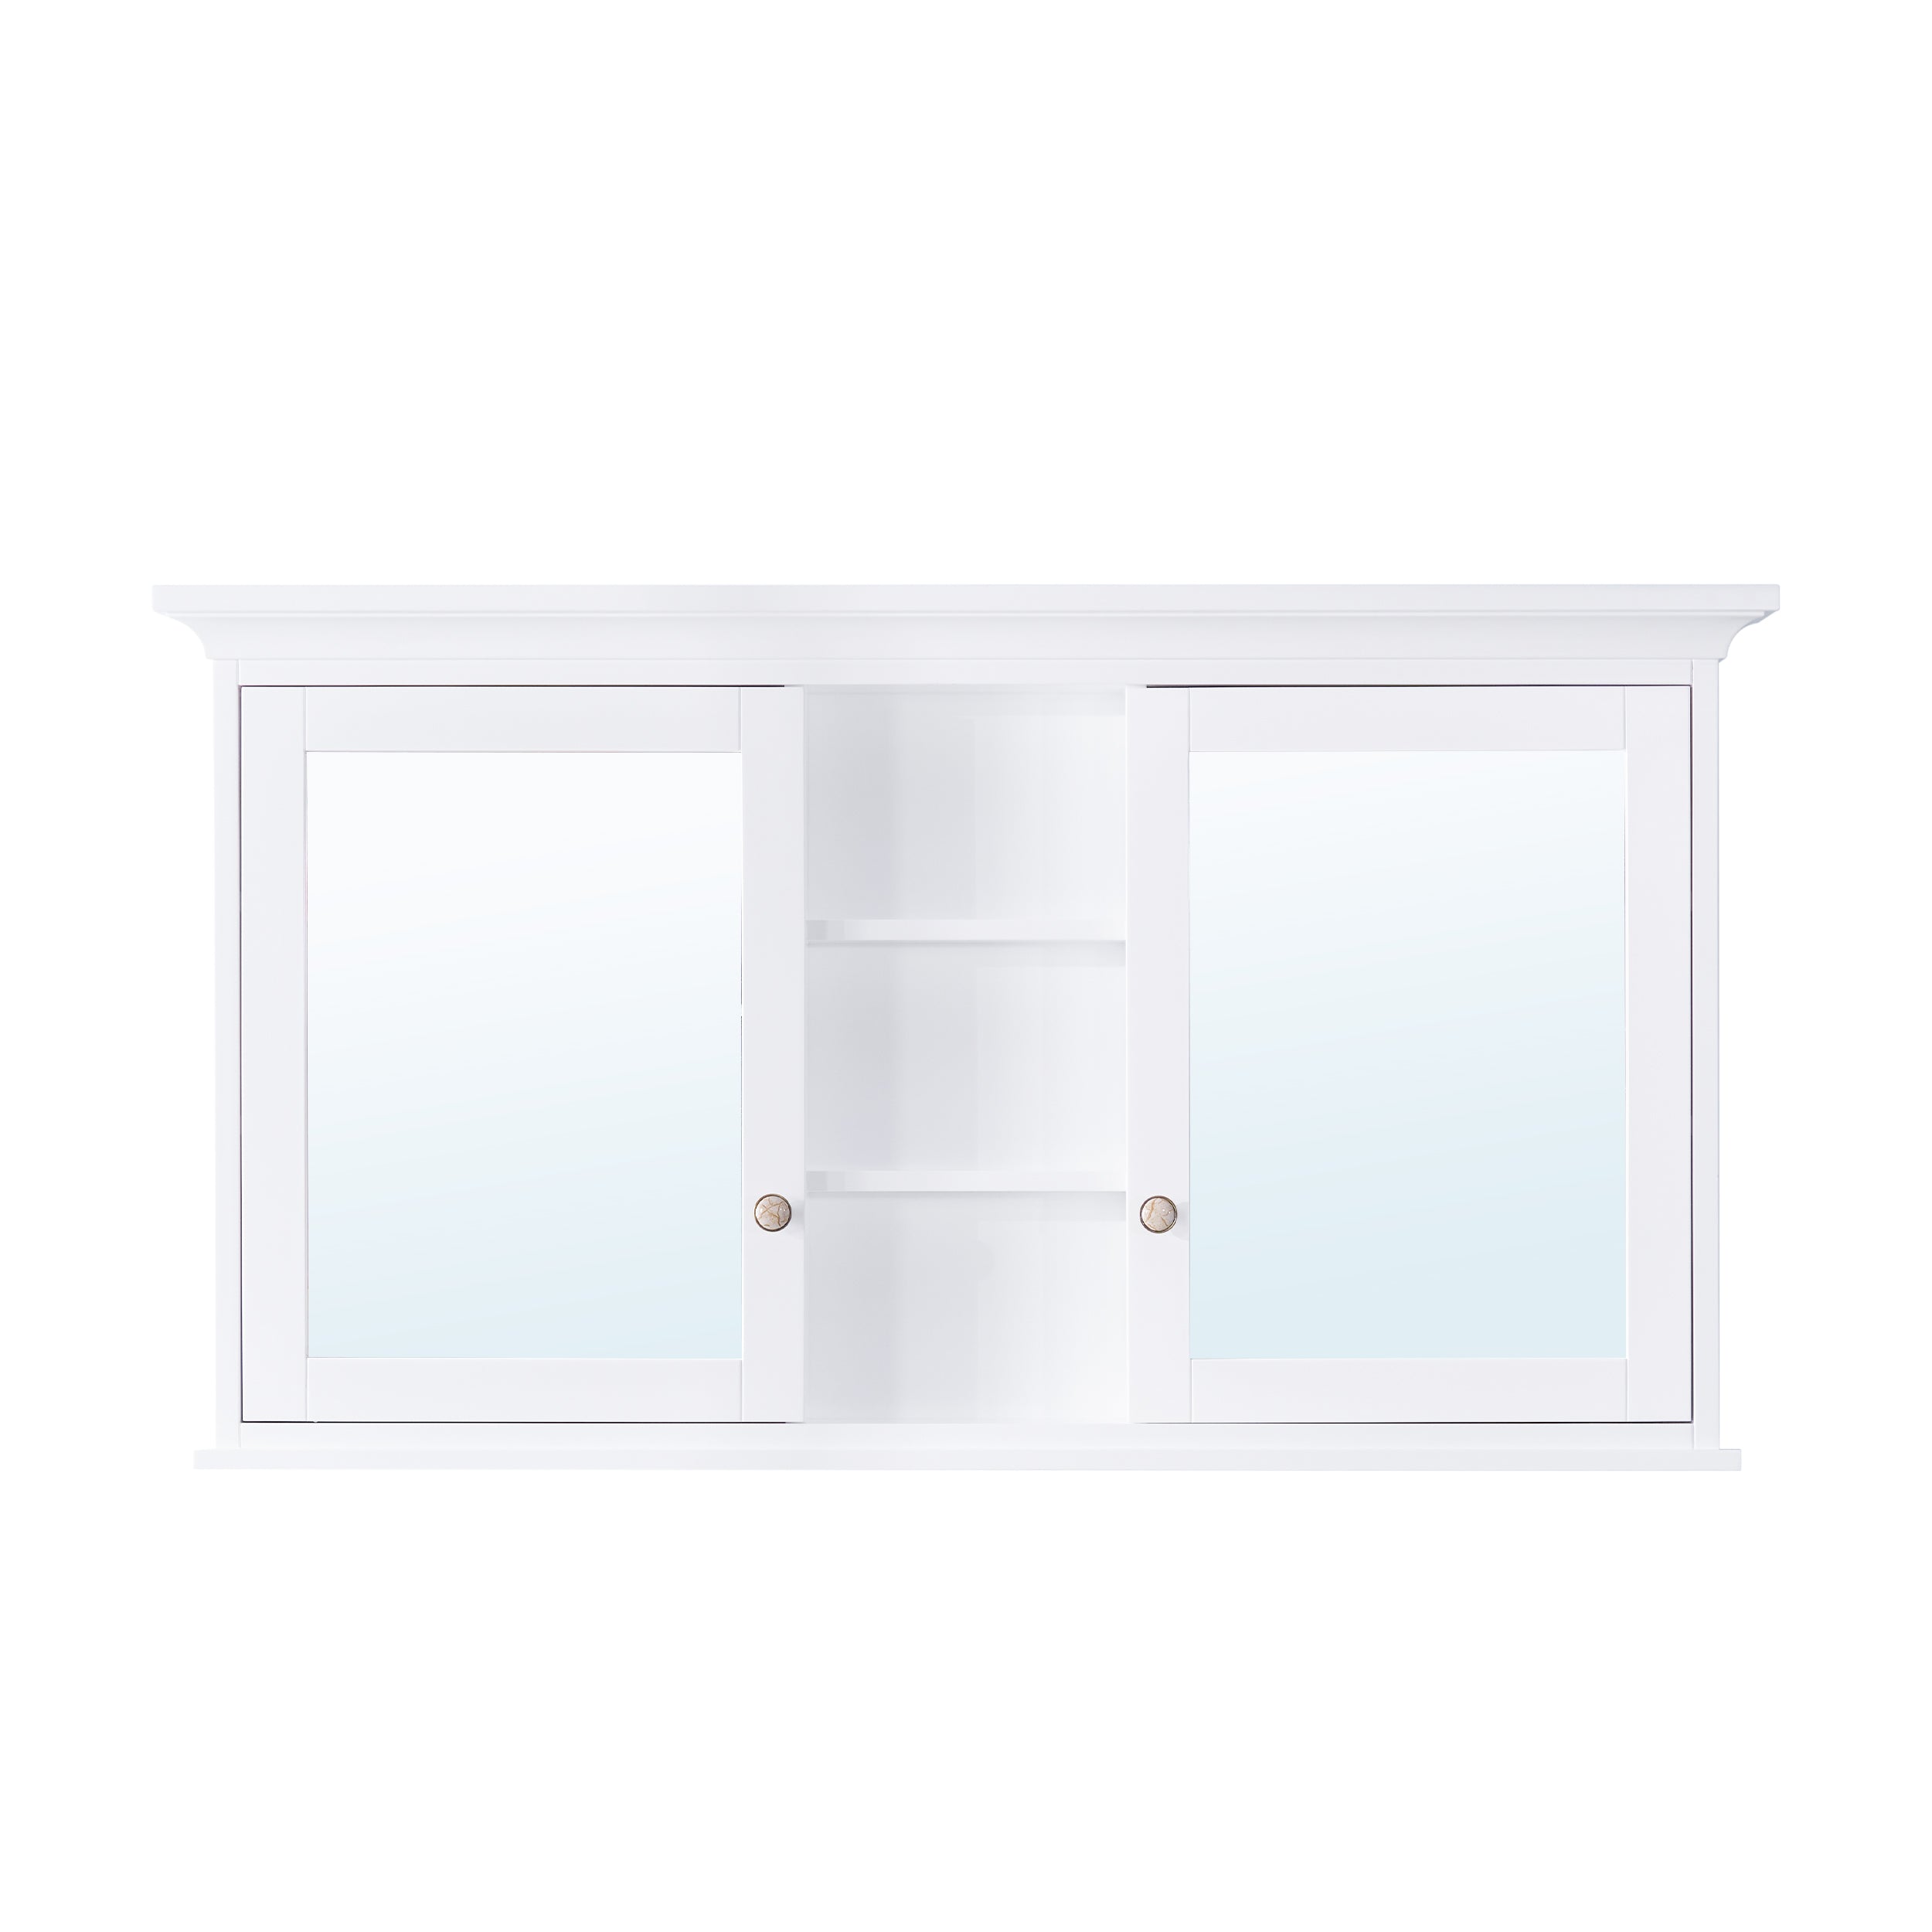 55 in.W x 30 in.H Surface-Mount Bathroom Medicine Cabinet with Mirror in White